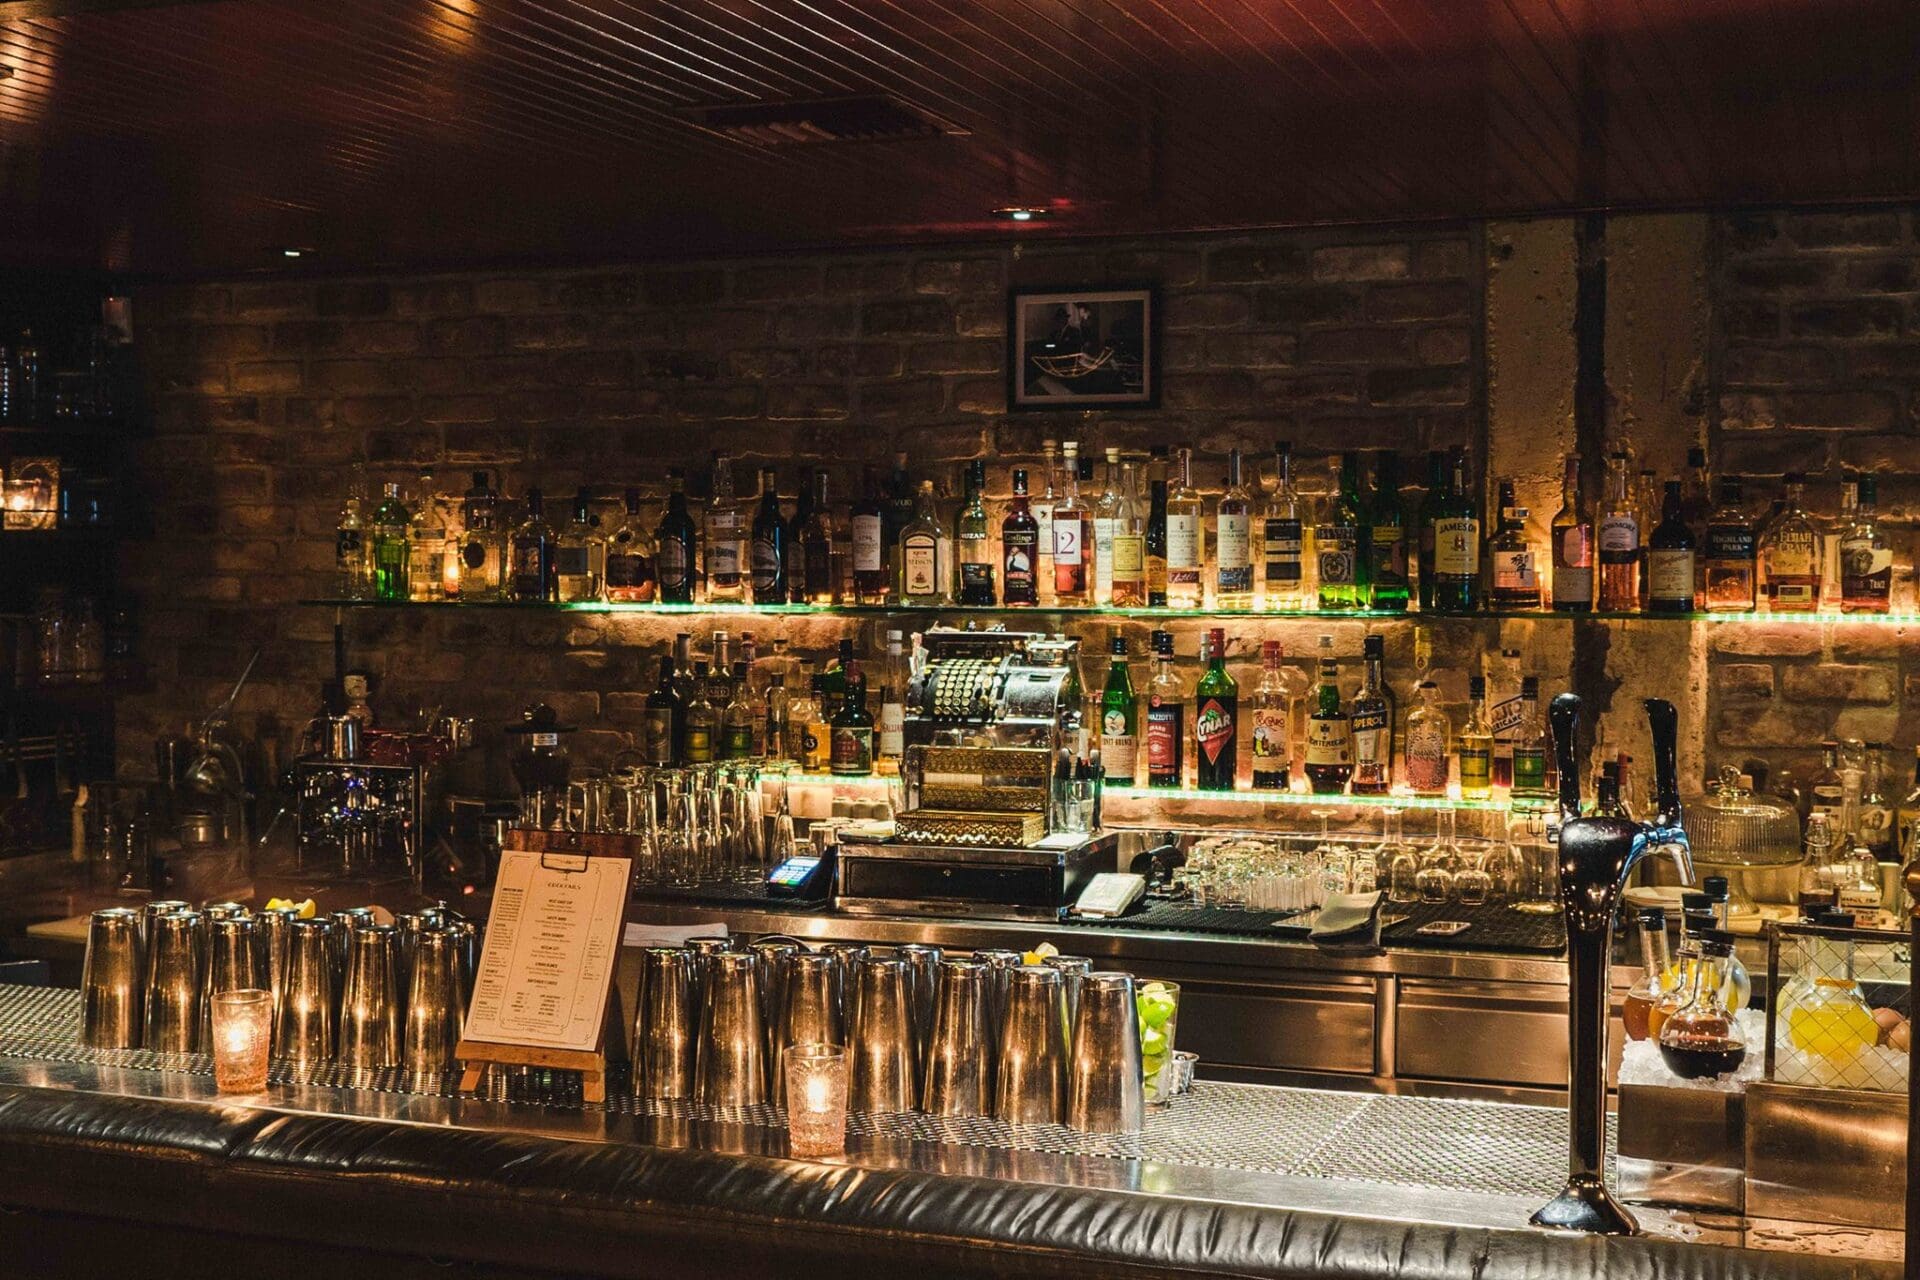 Best LA cocktail bars | The bar area at The Varnish